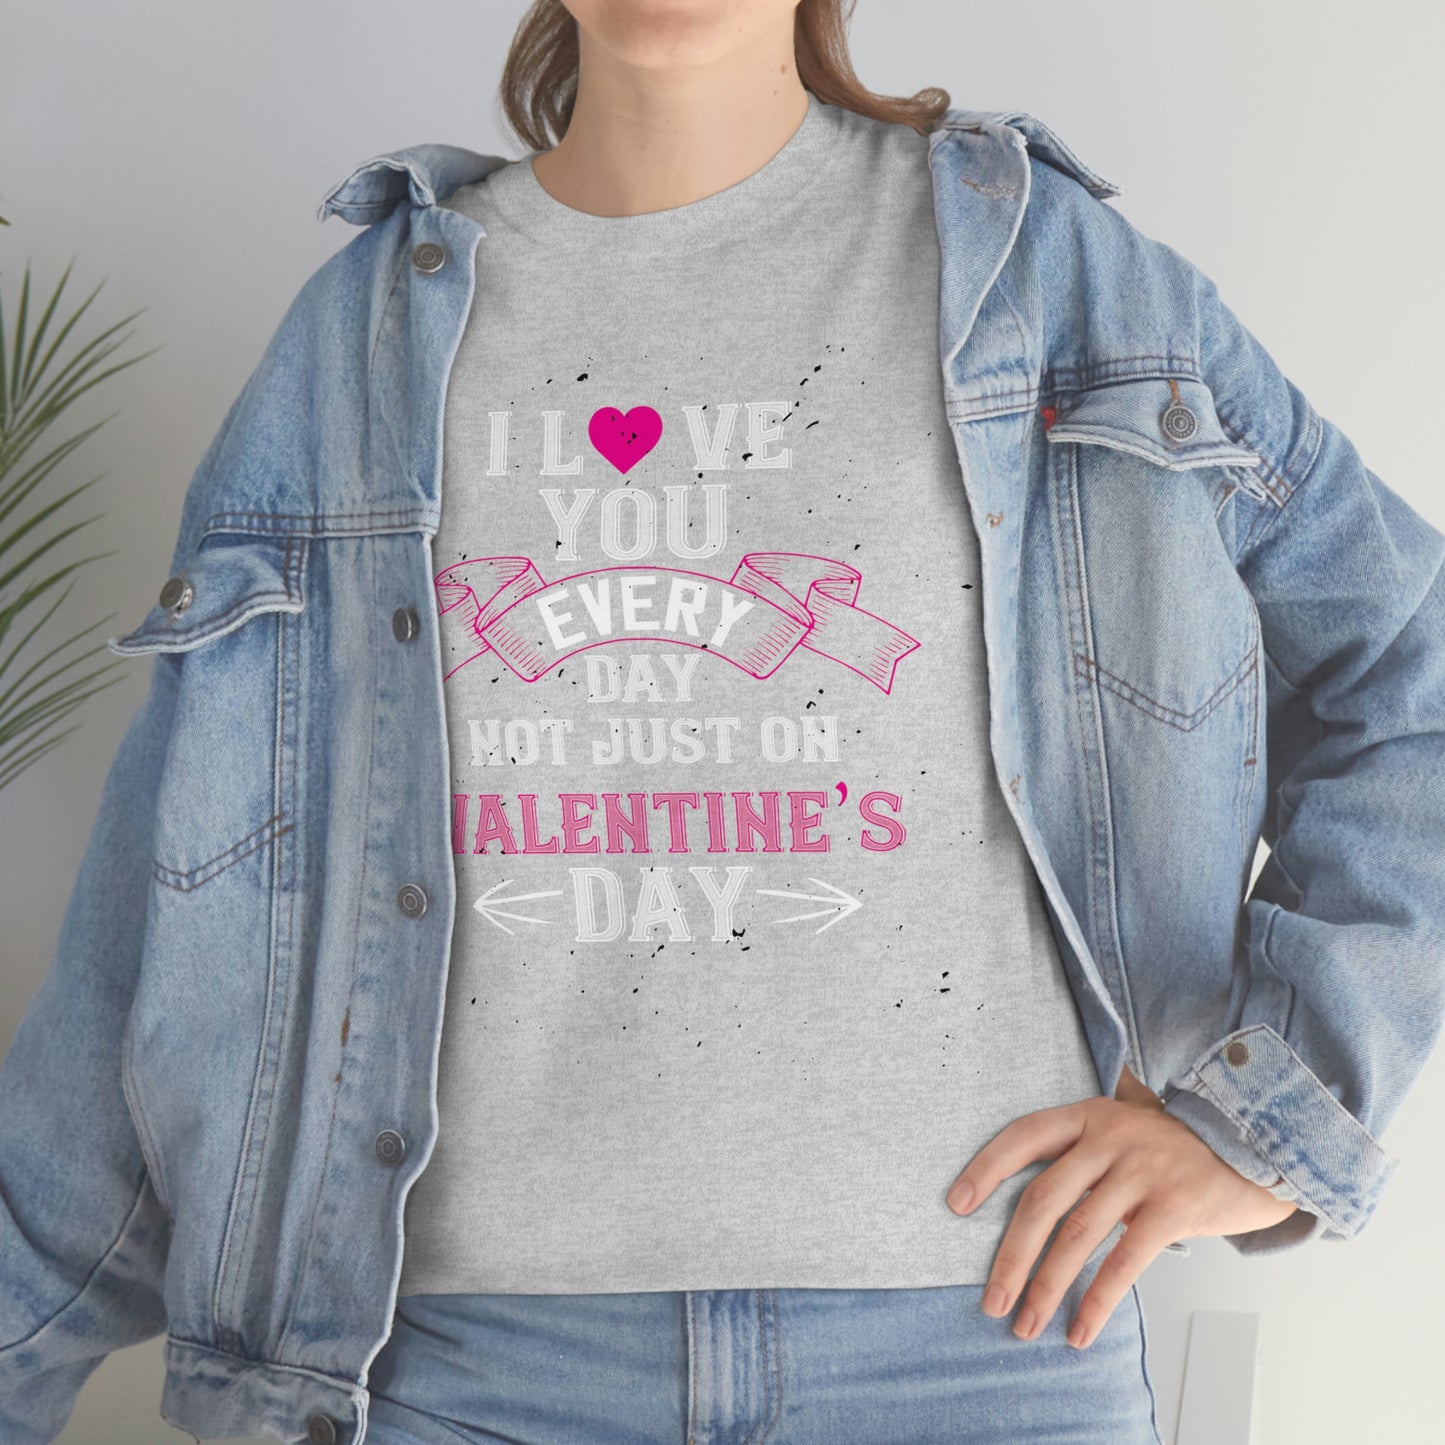 I Love You Every Day Cotton Tee